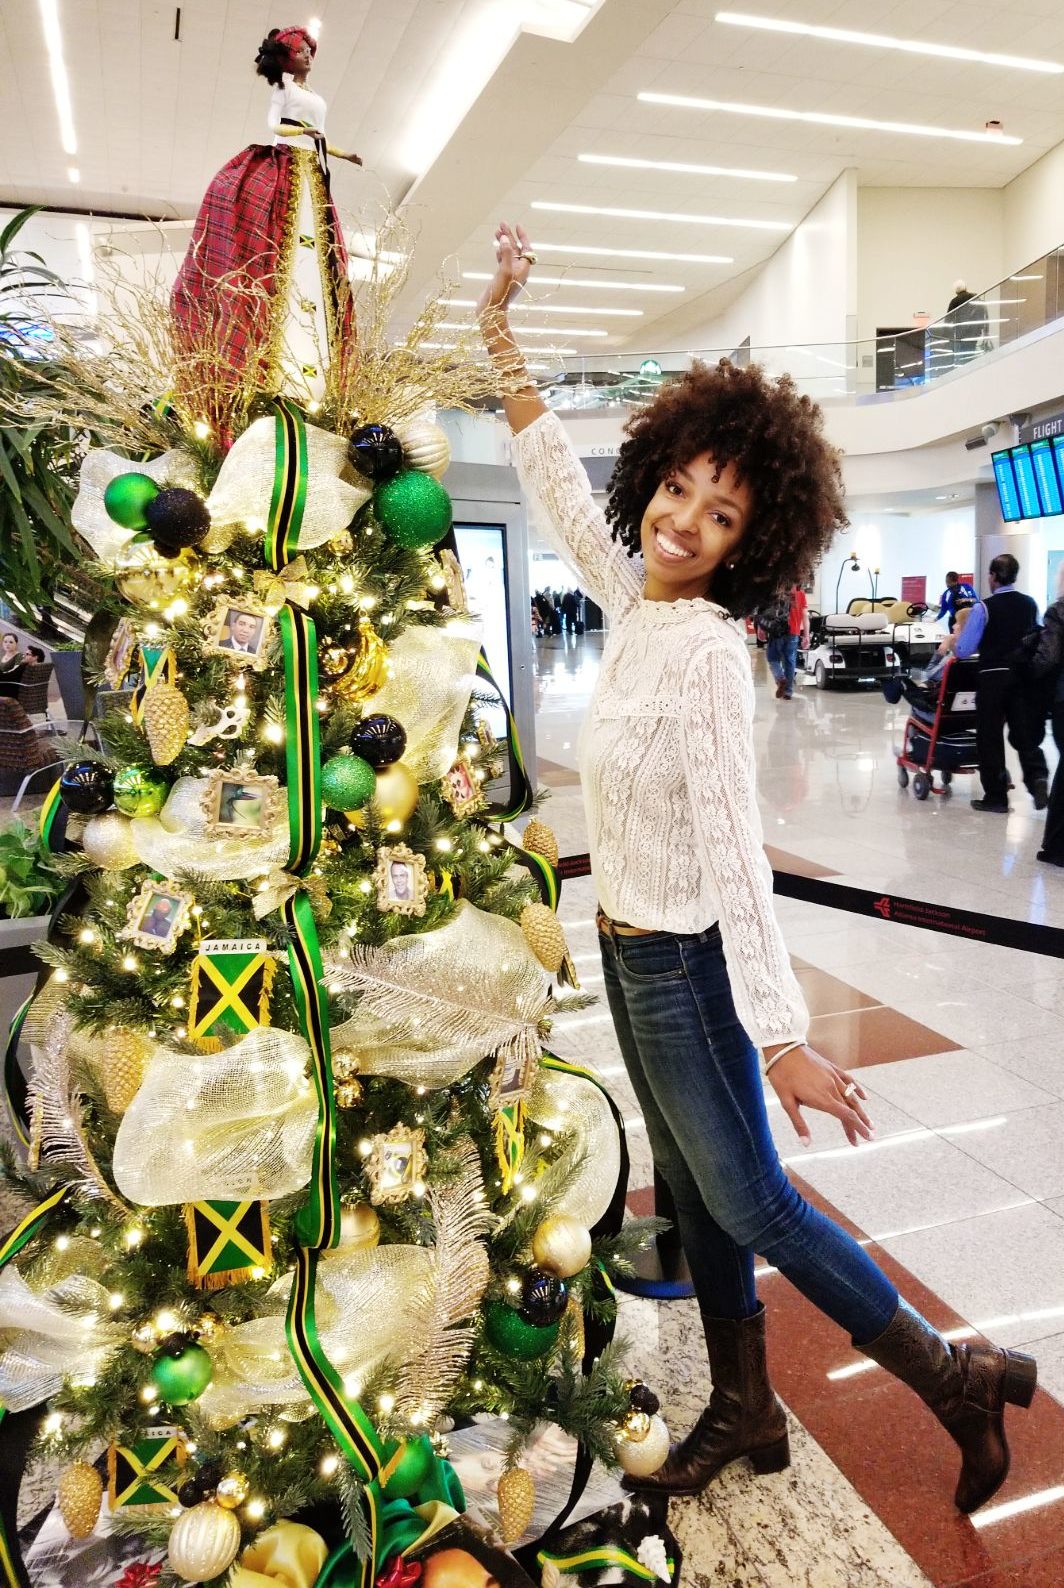 DECORATING THE JAMAICAN CHRISTMAS TREE FOR HARTSFIELD JACKSON INT'L - GLOBAL WINTER ...1064 x 1588